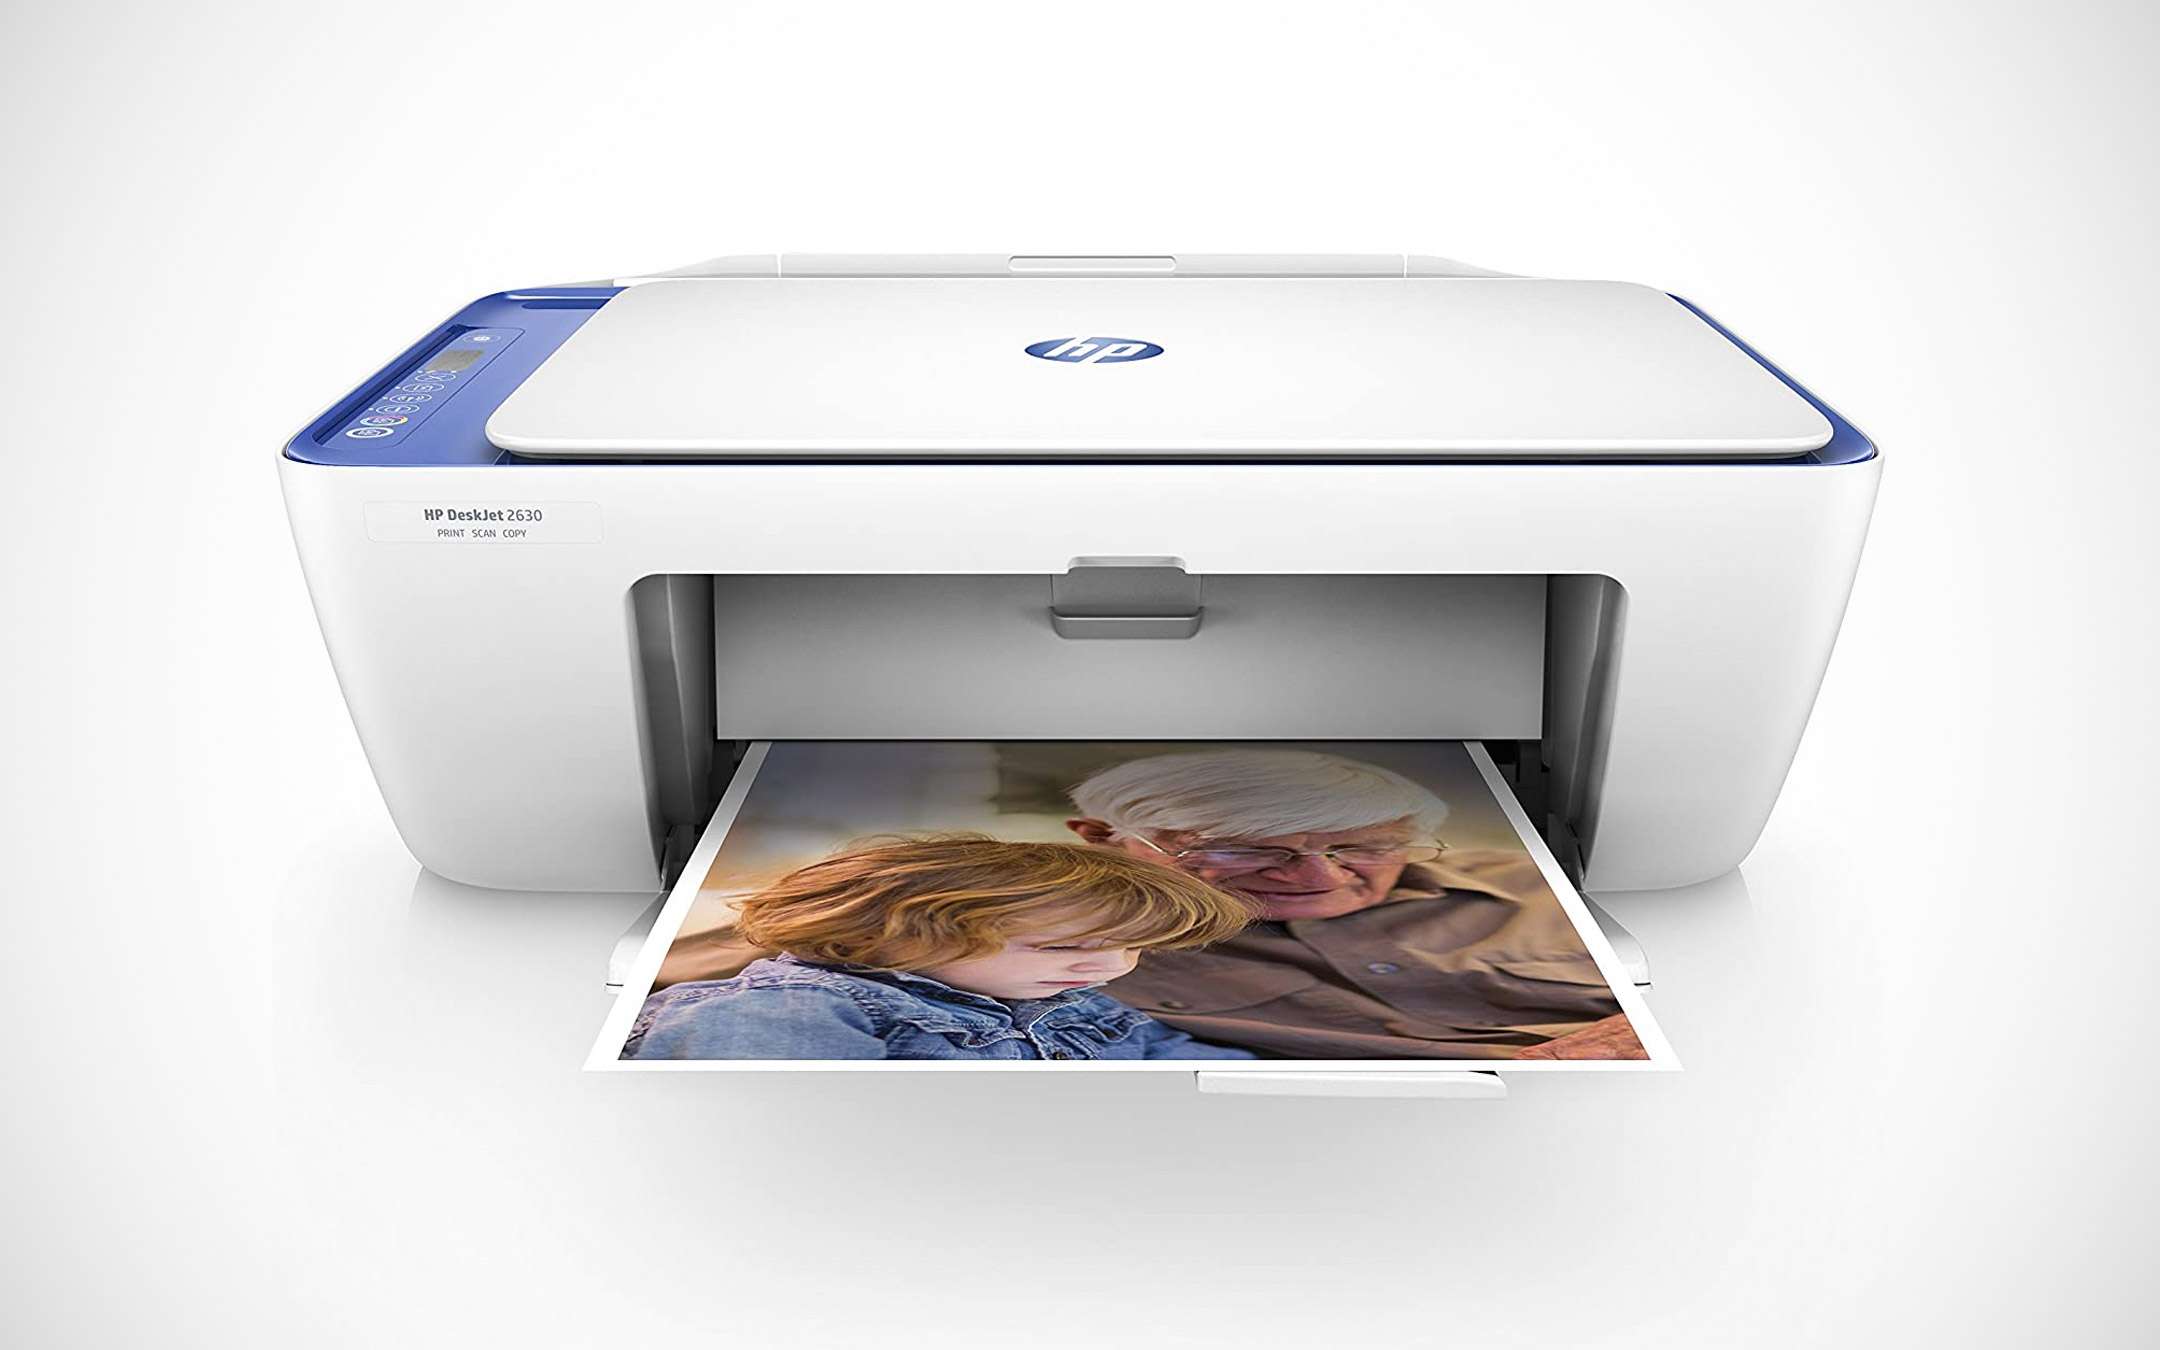 HP multifunction printer for only 49.99 euros